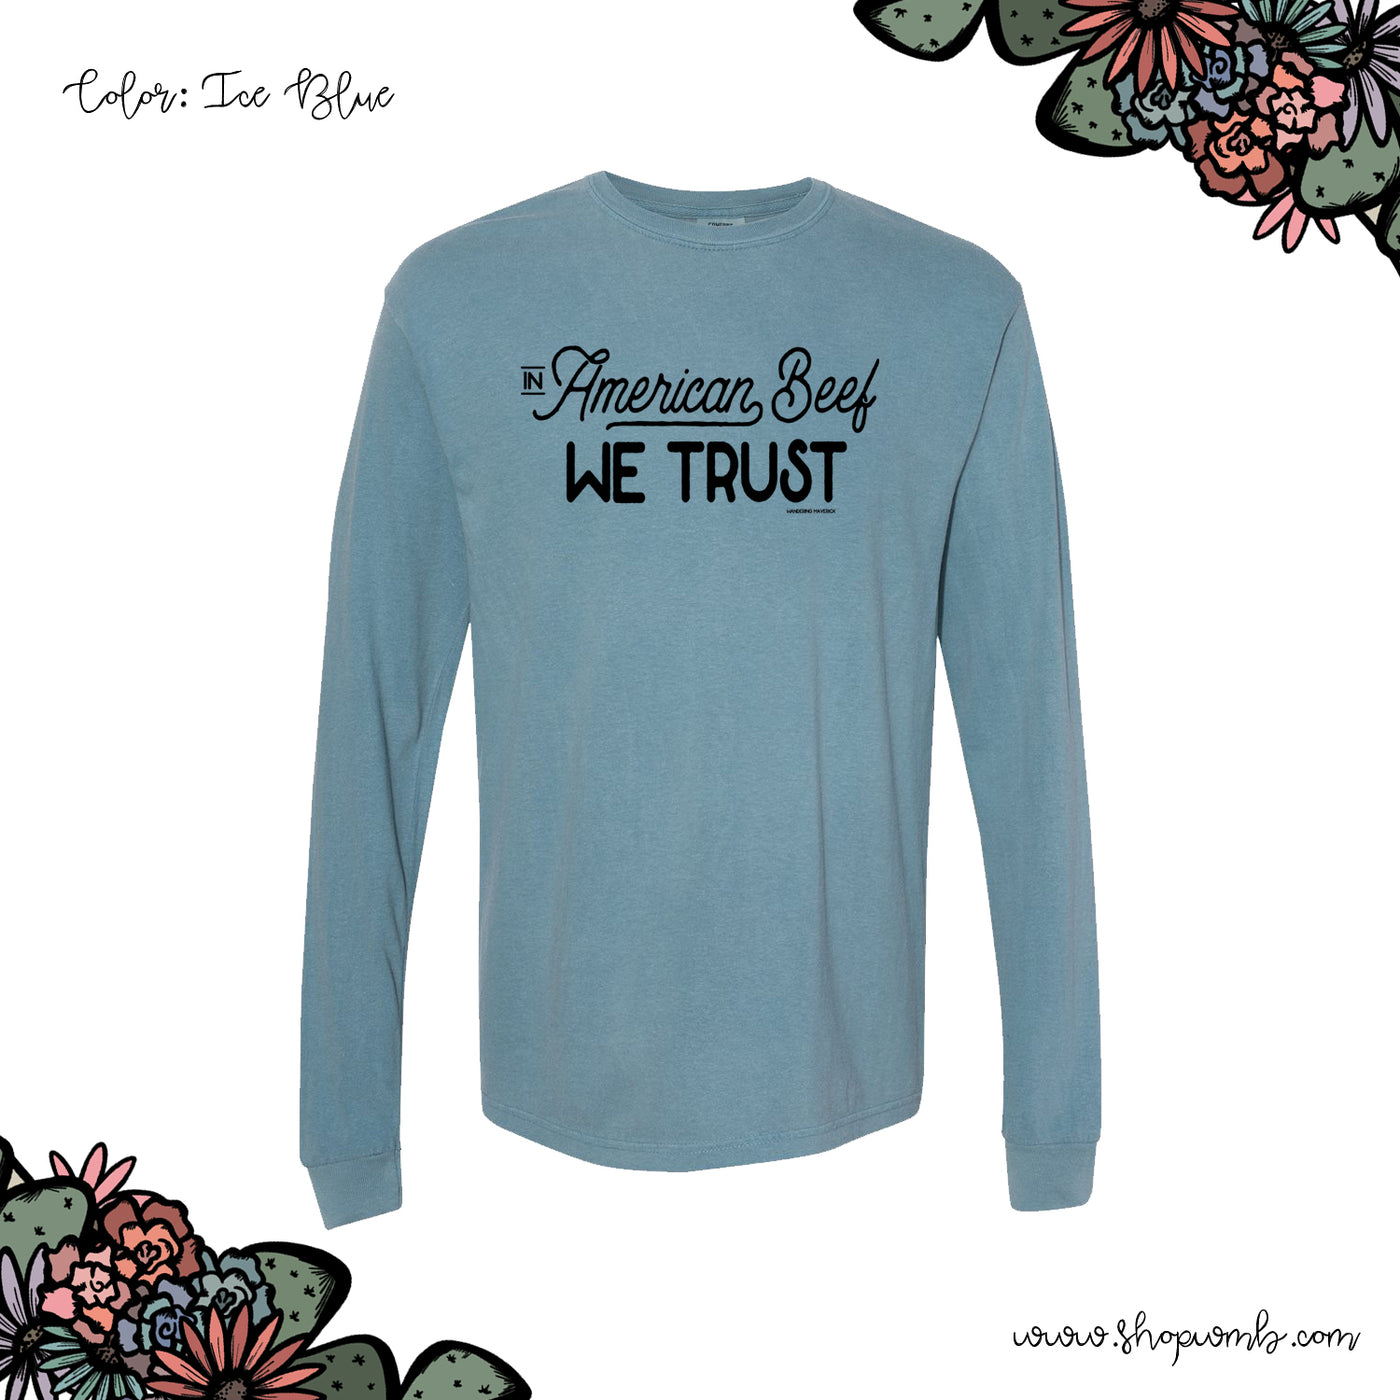 In American Beef We Trust LONG SLEEVE T-Shirt (S-3XL) - Multiple Colors!